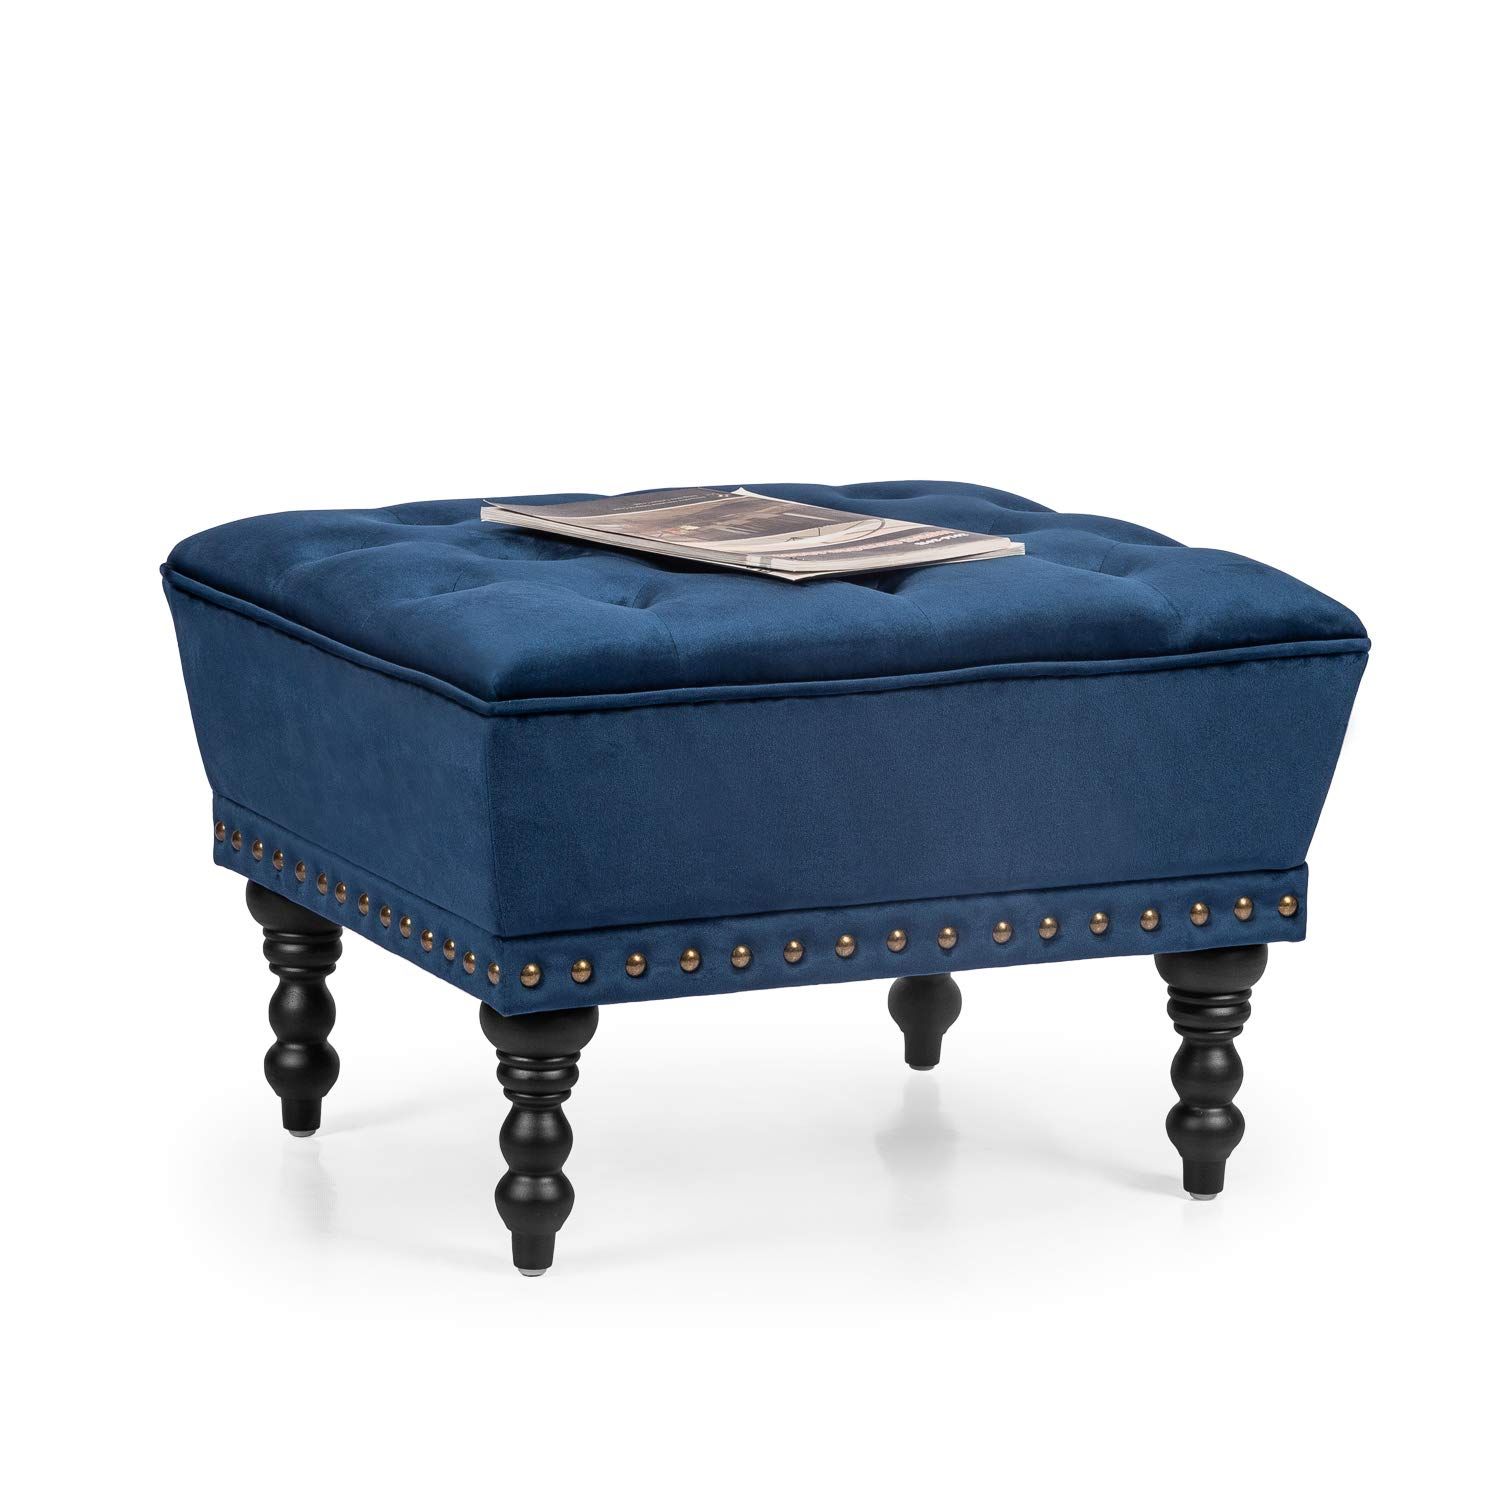 Homebeez Fabric Tufted Ottoman Foot Stool Footrest Navy Blue – Walmart Within Blue Slate Jute Pouf Ottomans (View 11 of 20)